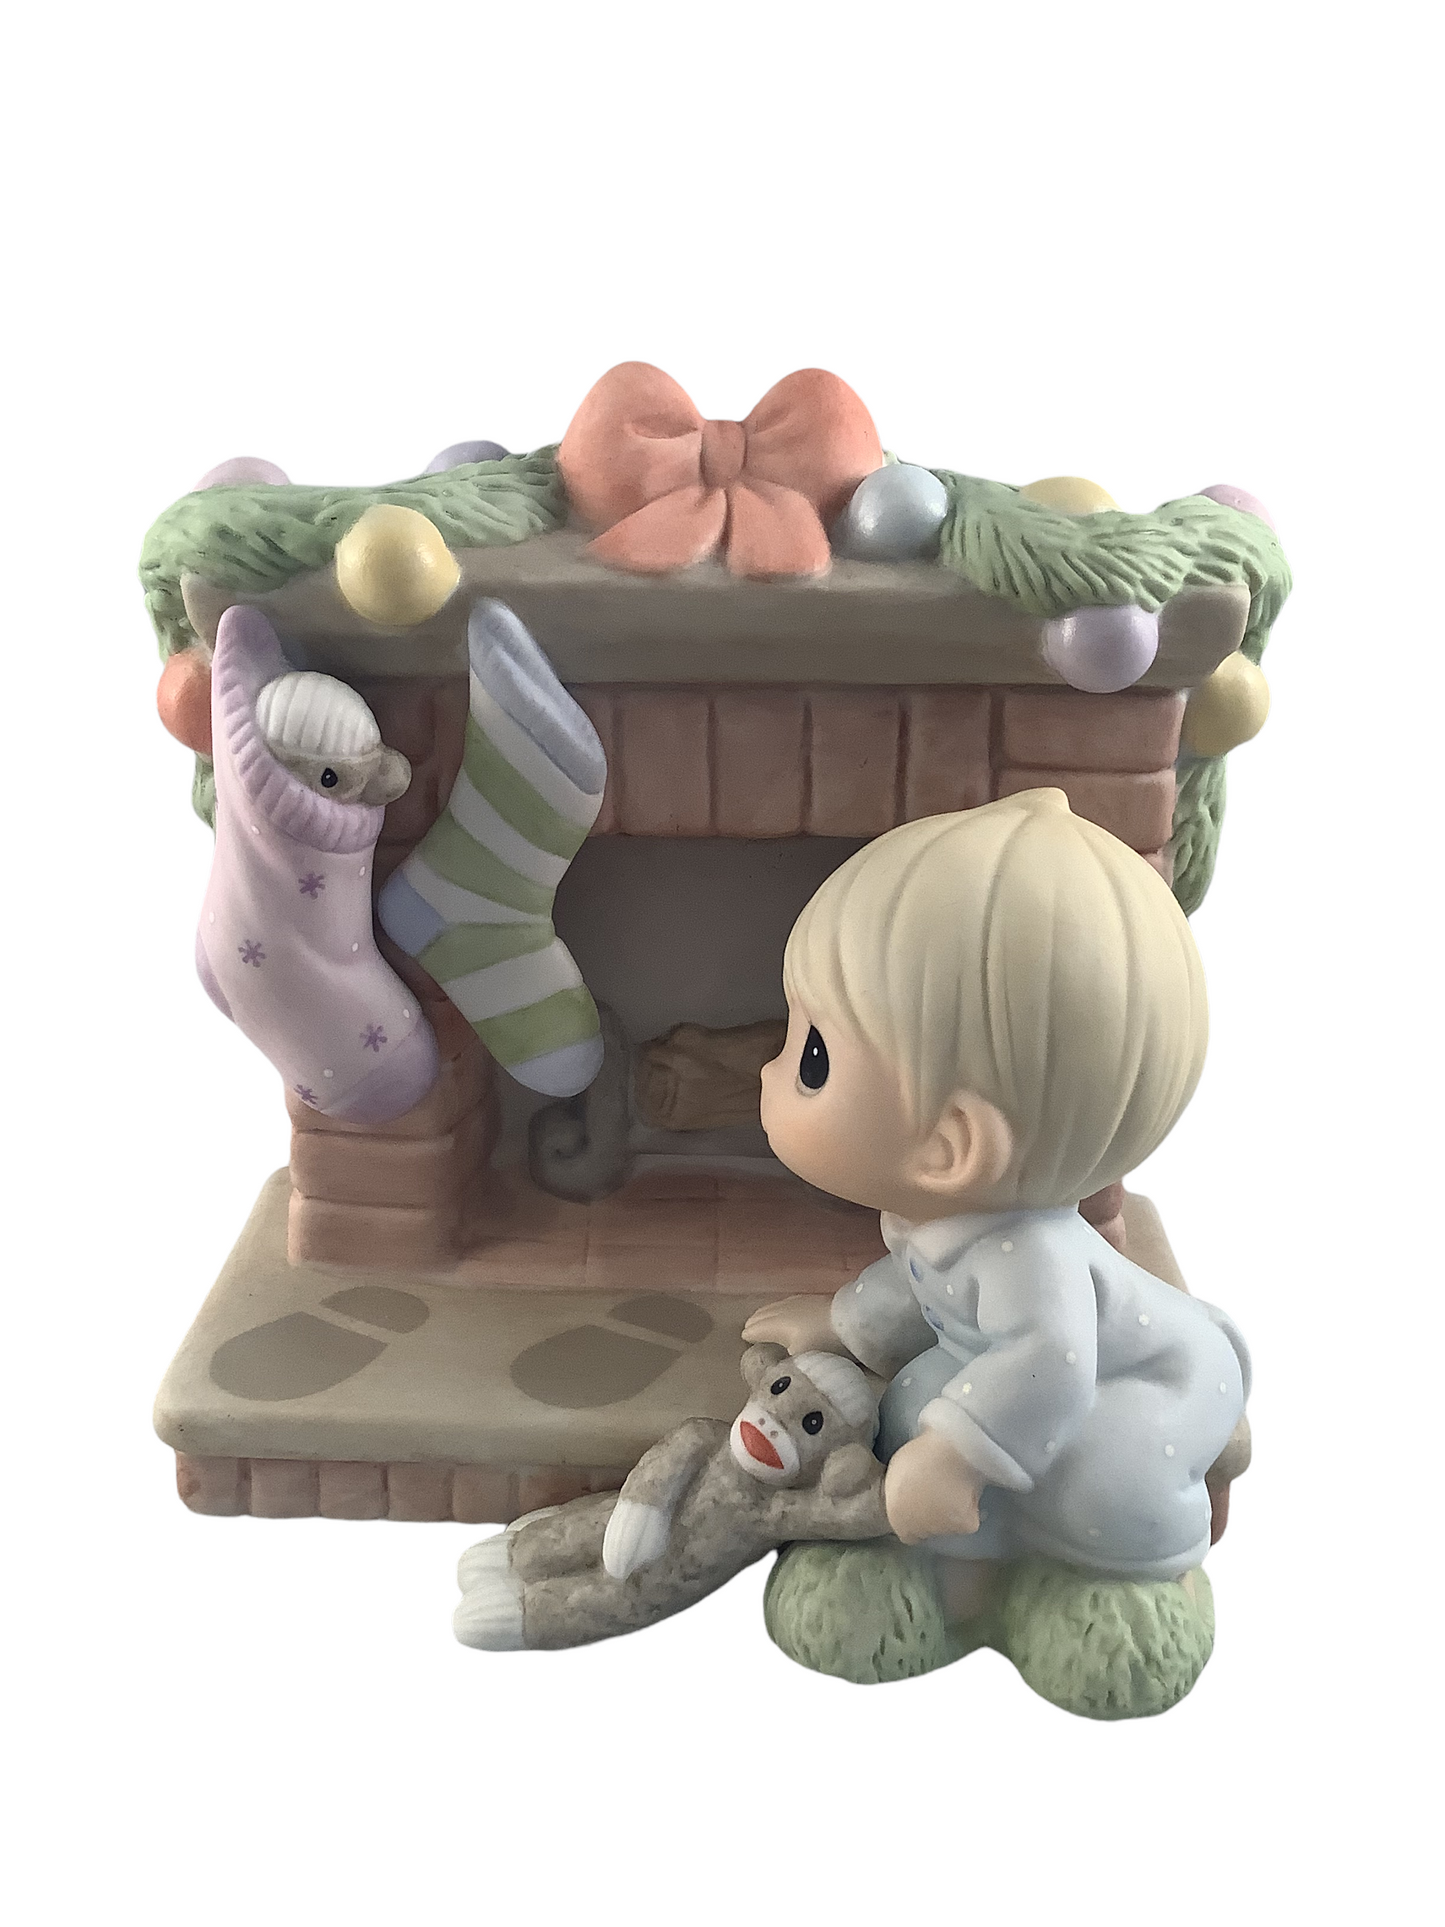 The Wonder Of It All - Precious Moment Figurine